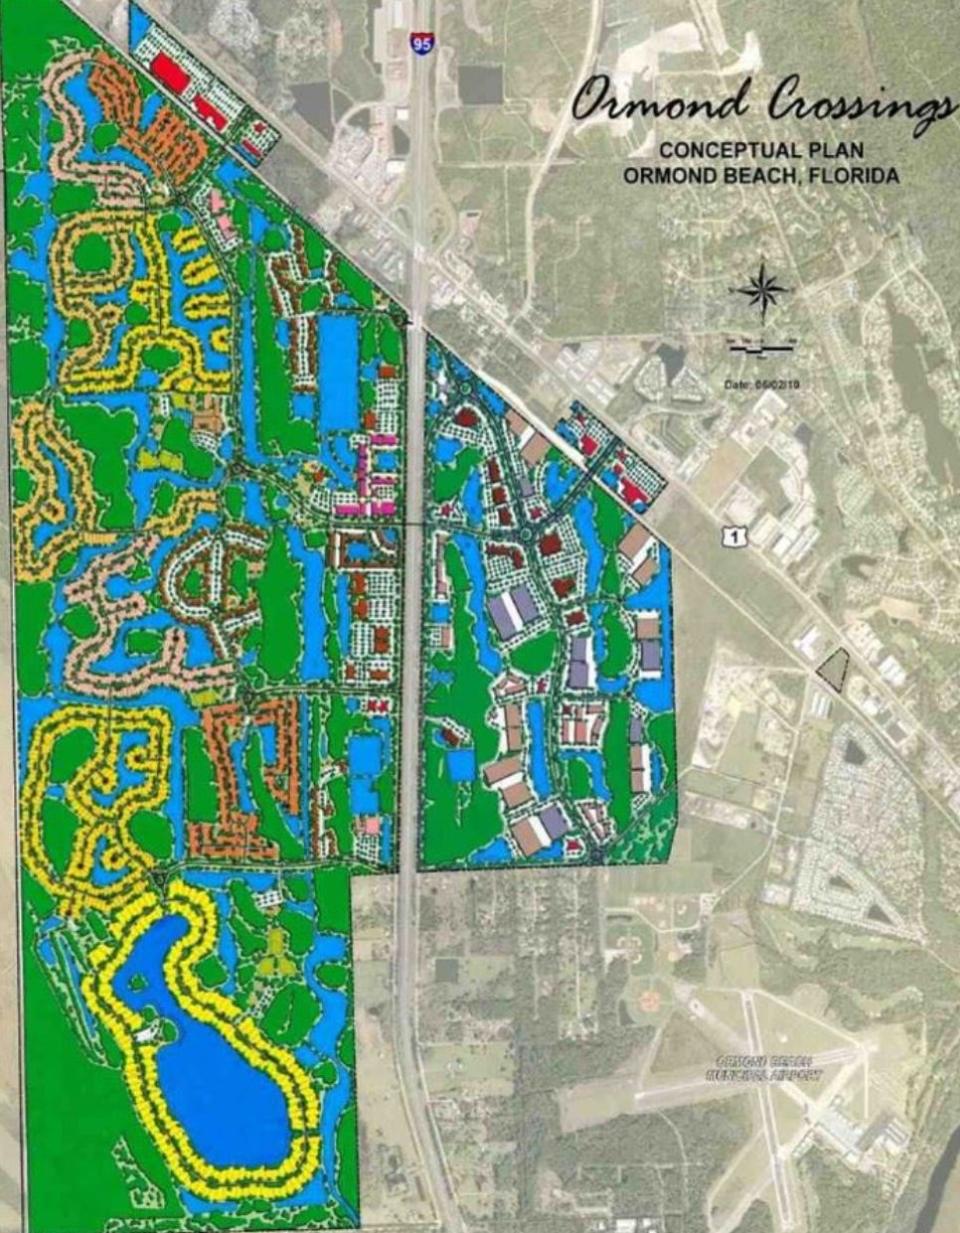 This is a conceptual plan for Ormond Crossings, which would have 2,950 homes built on the west side of Interstate 95 and nearly 3 million square feet of commercial space on the east side of the interstate. The 3,000 acres are south of U.S. 1 on both sides of I-95 and mostly south of a Florida East Coast Railroad line that runs parallel to U.S. 1.